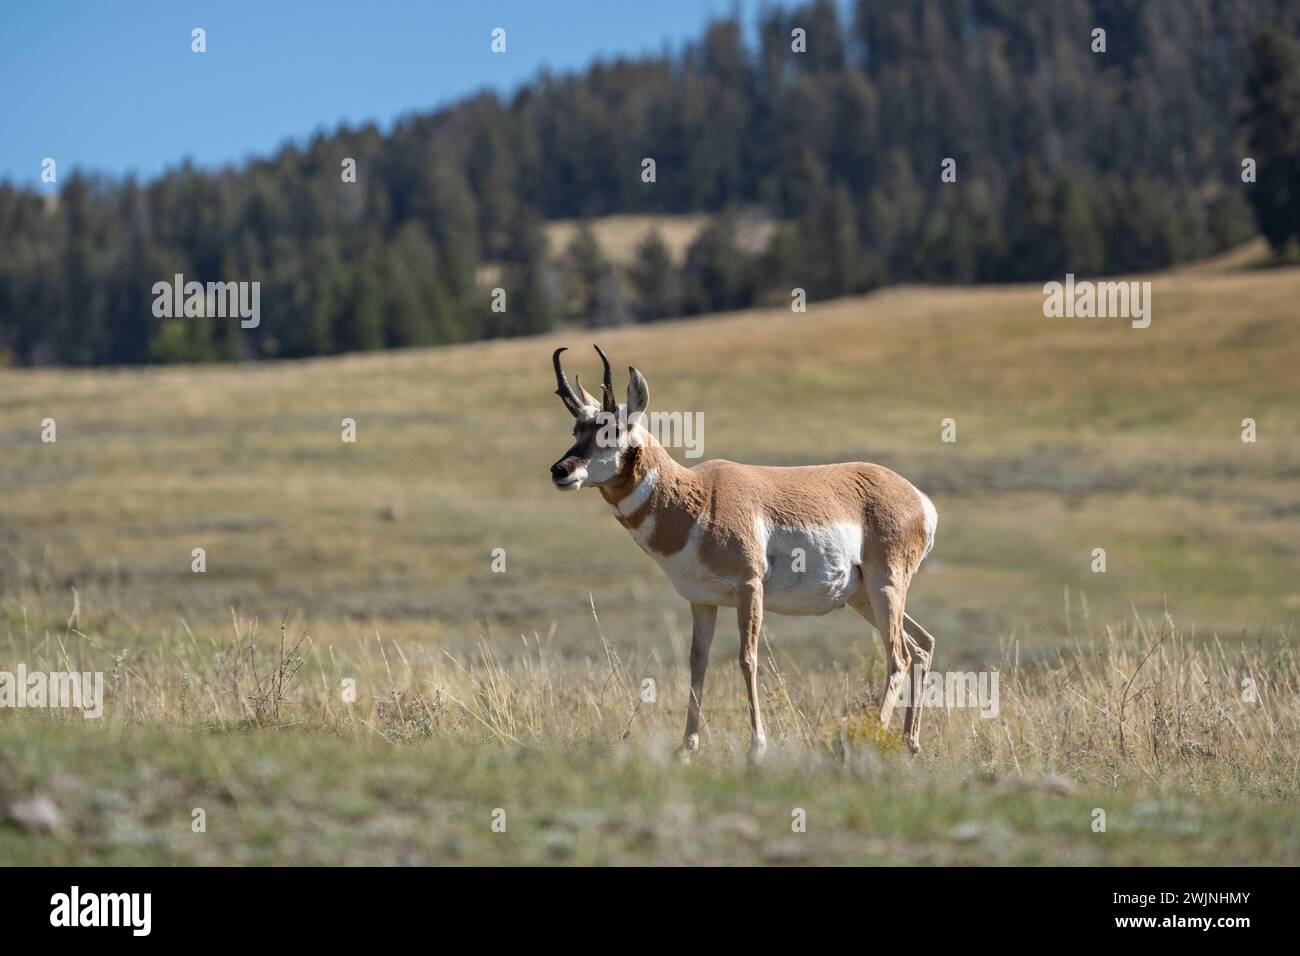 Pronghorn (Antilocapra americana) with autumn background colors in Lamar Valley, Yellowstone National Park. Stock Photo